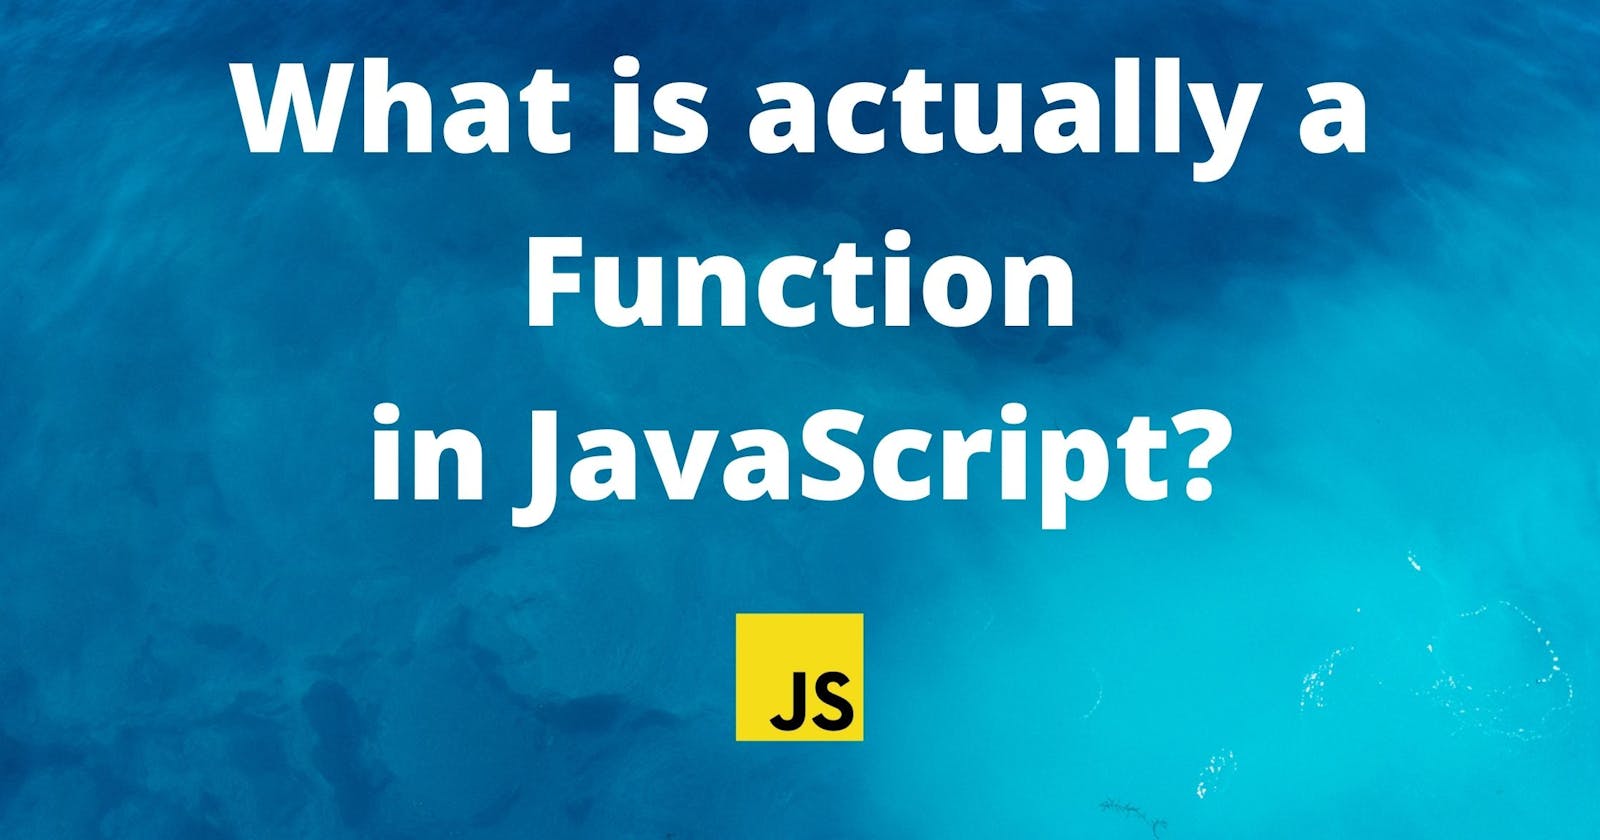 What is actually a "function" in JavaScript?